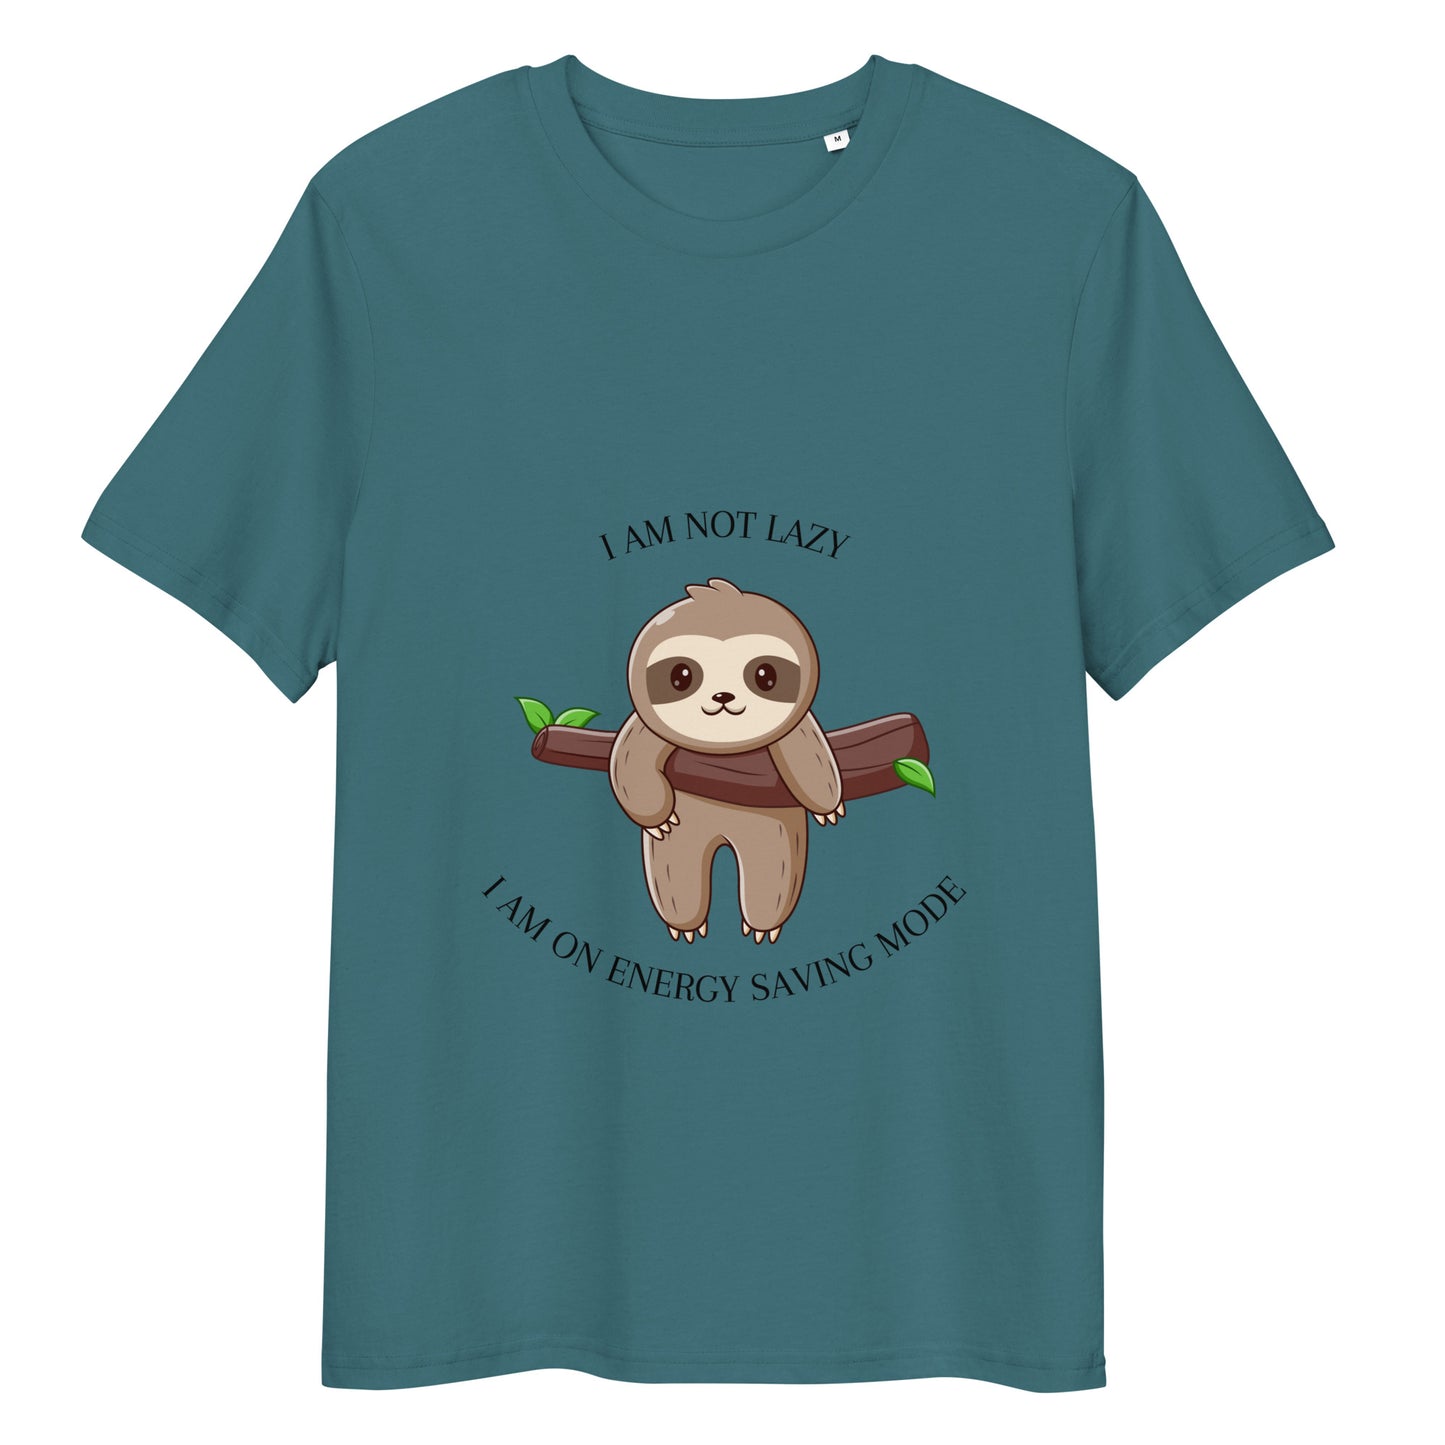 Energy Saving Mode, Chill Vibes, Relaxation, Lazy Day, Comfort, Style, Branch, Animal, Lazy, Sloth, Nature, Cute, Adorable, Innocent, Unisex